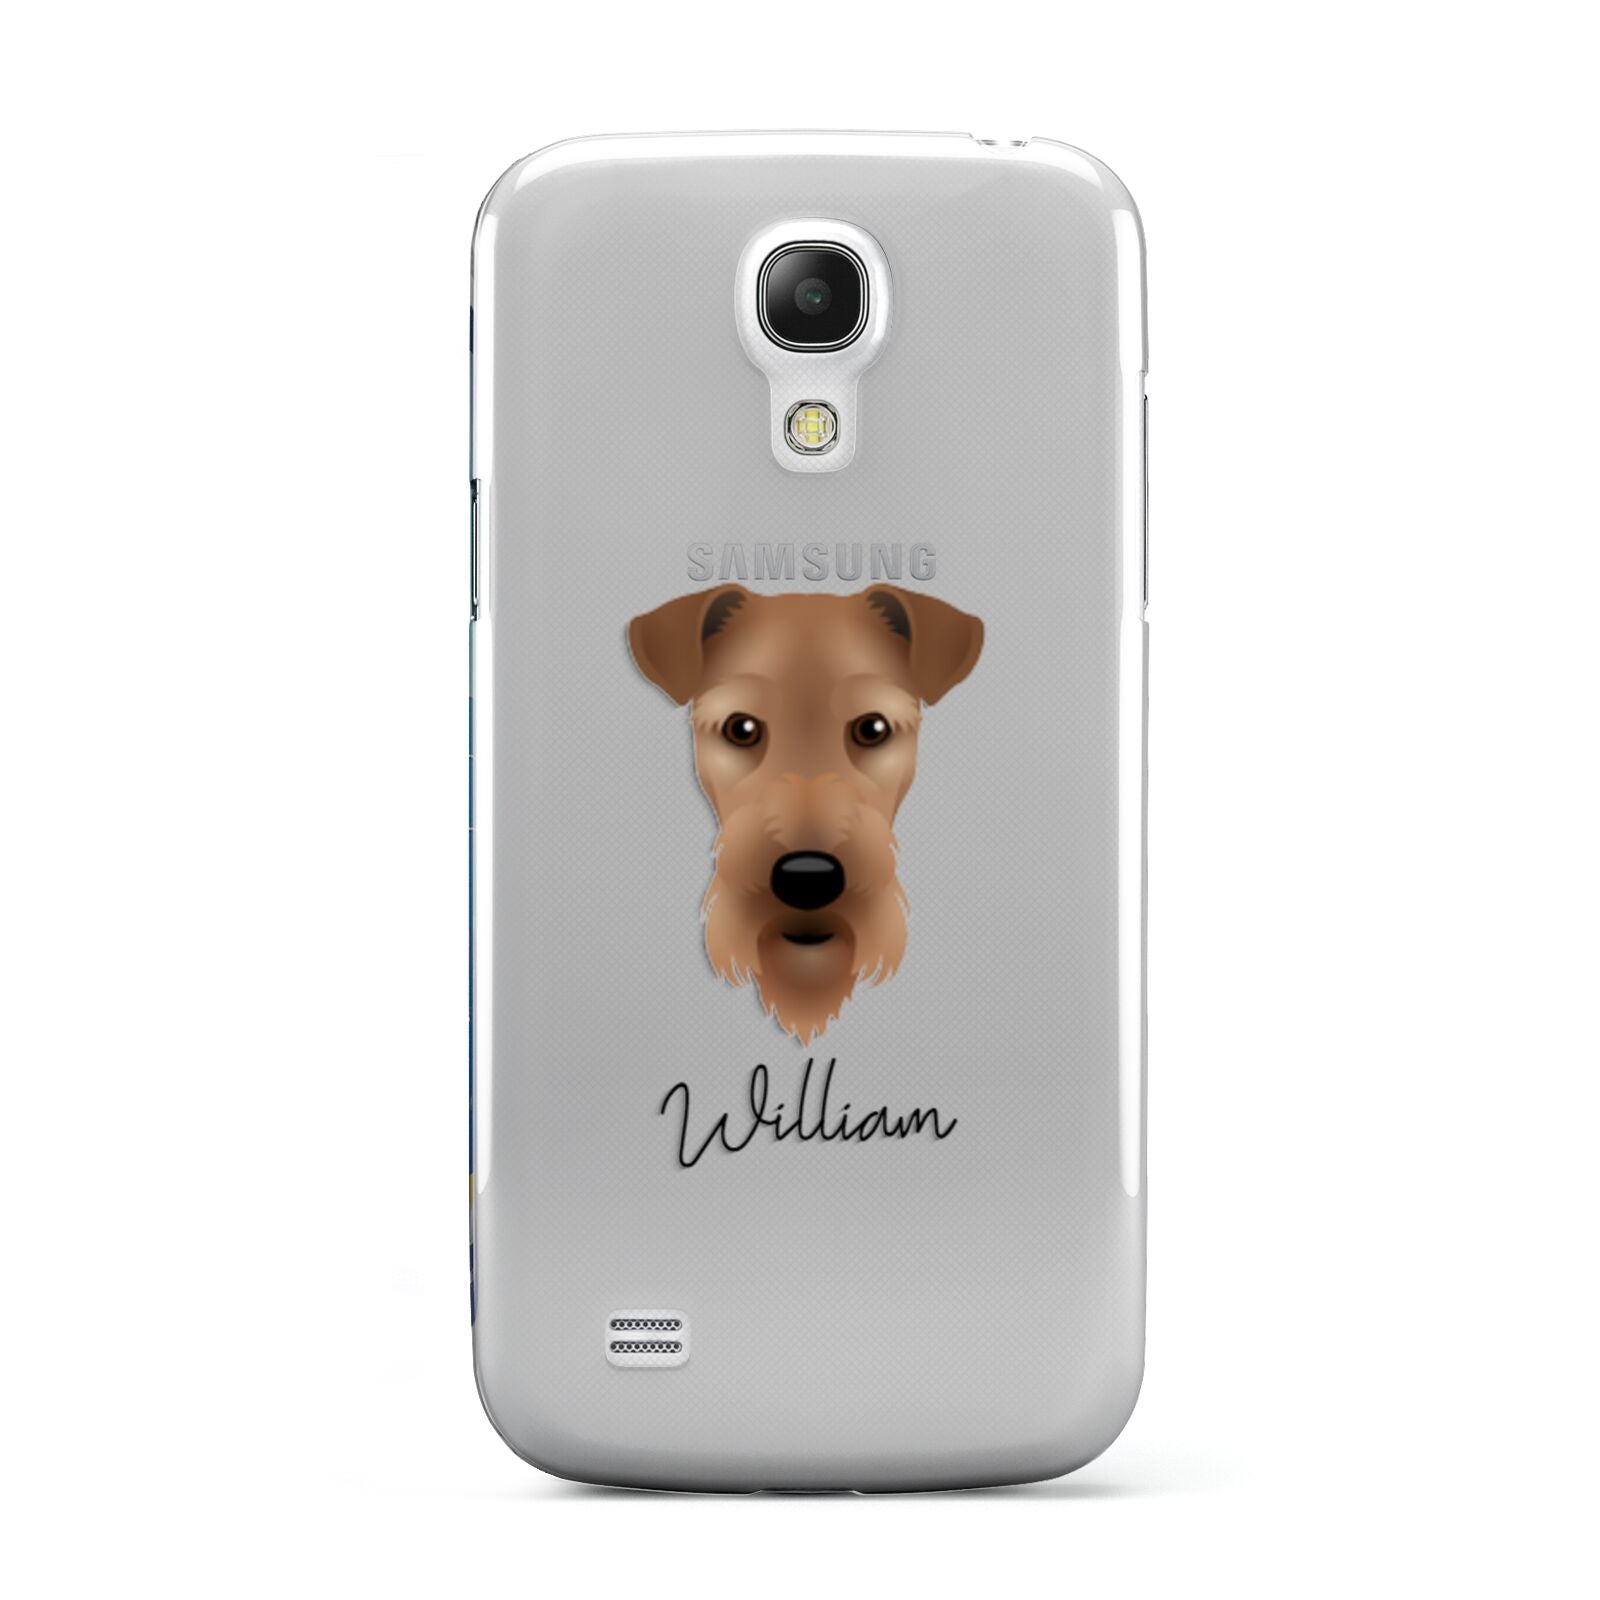 Airedale Terrier Personalised Samsung Galaxy S4 Mini Case